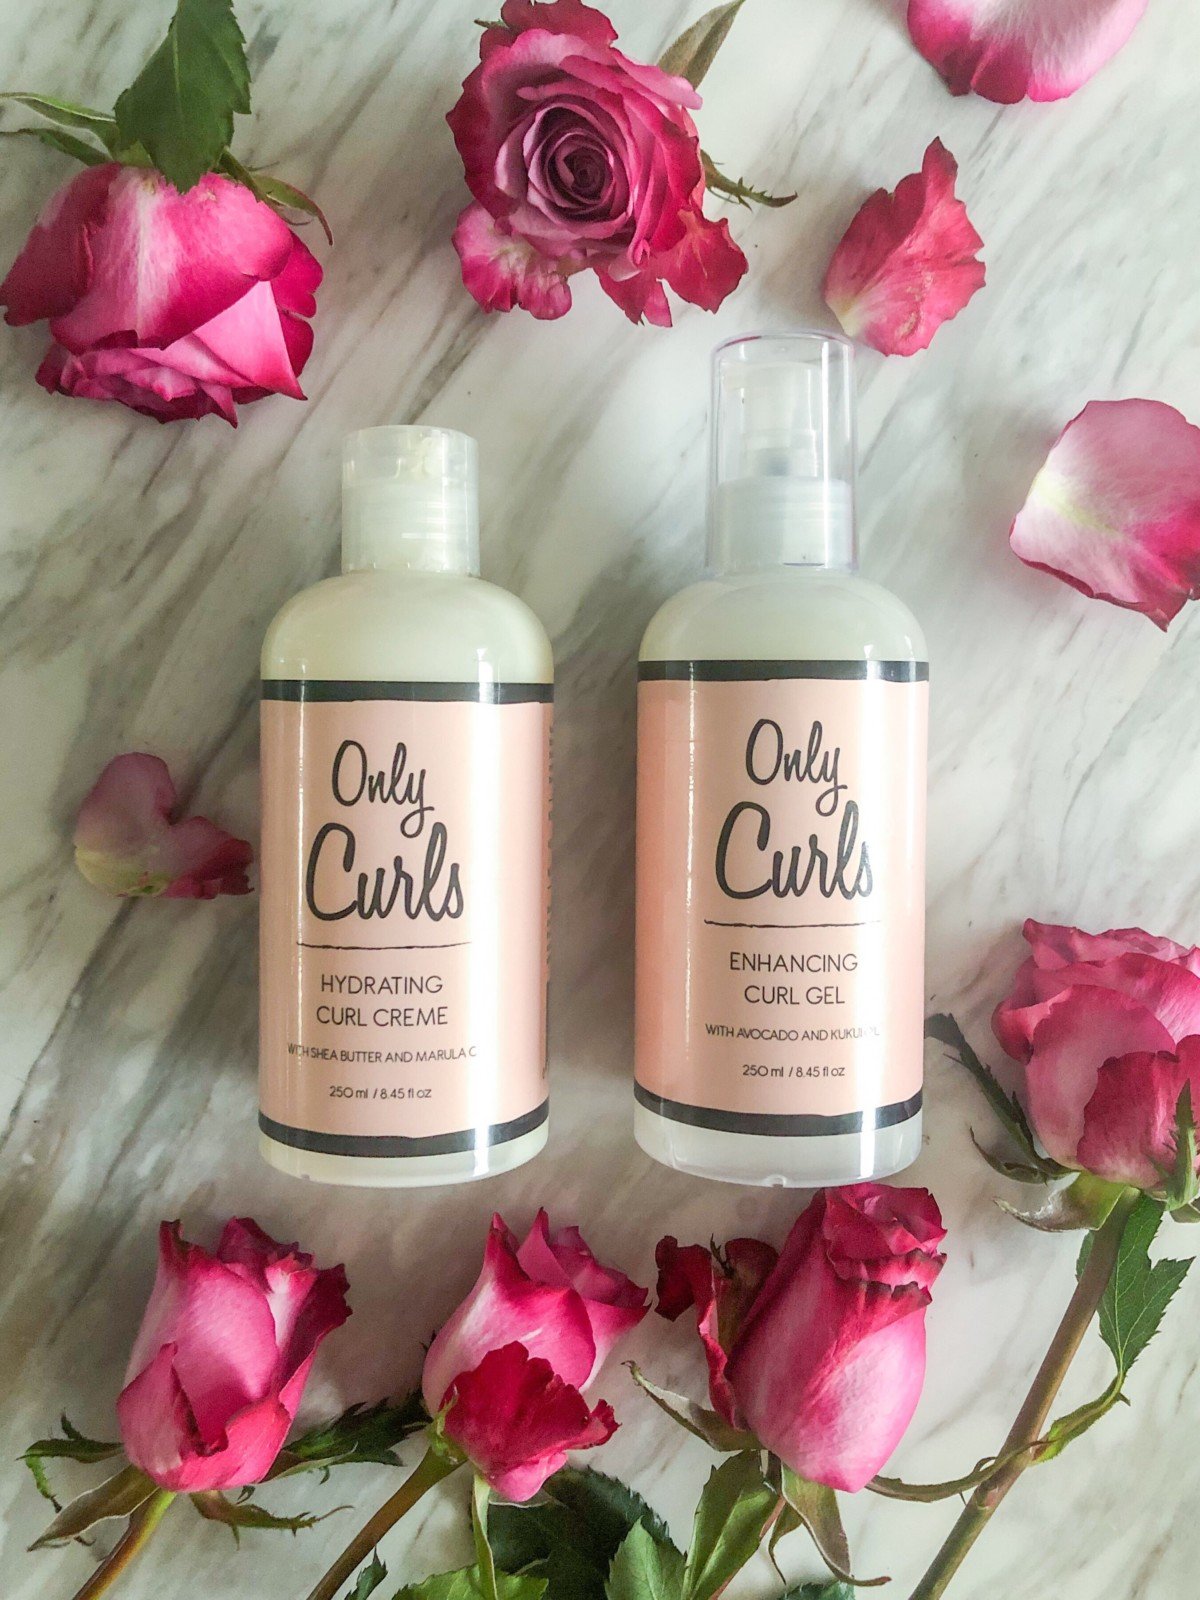 Only Curls Hair products, curl creme and curl gel for curly hair and curly girl method, with flowers